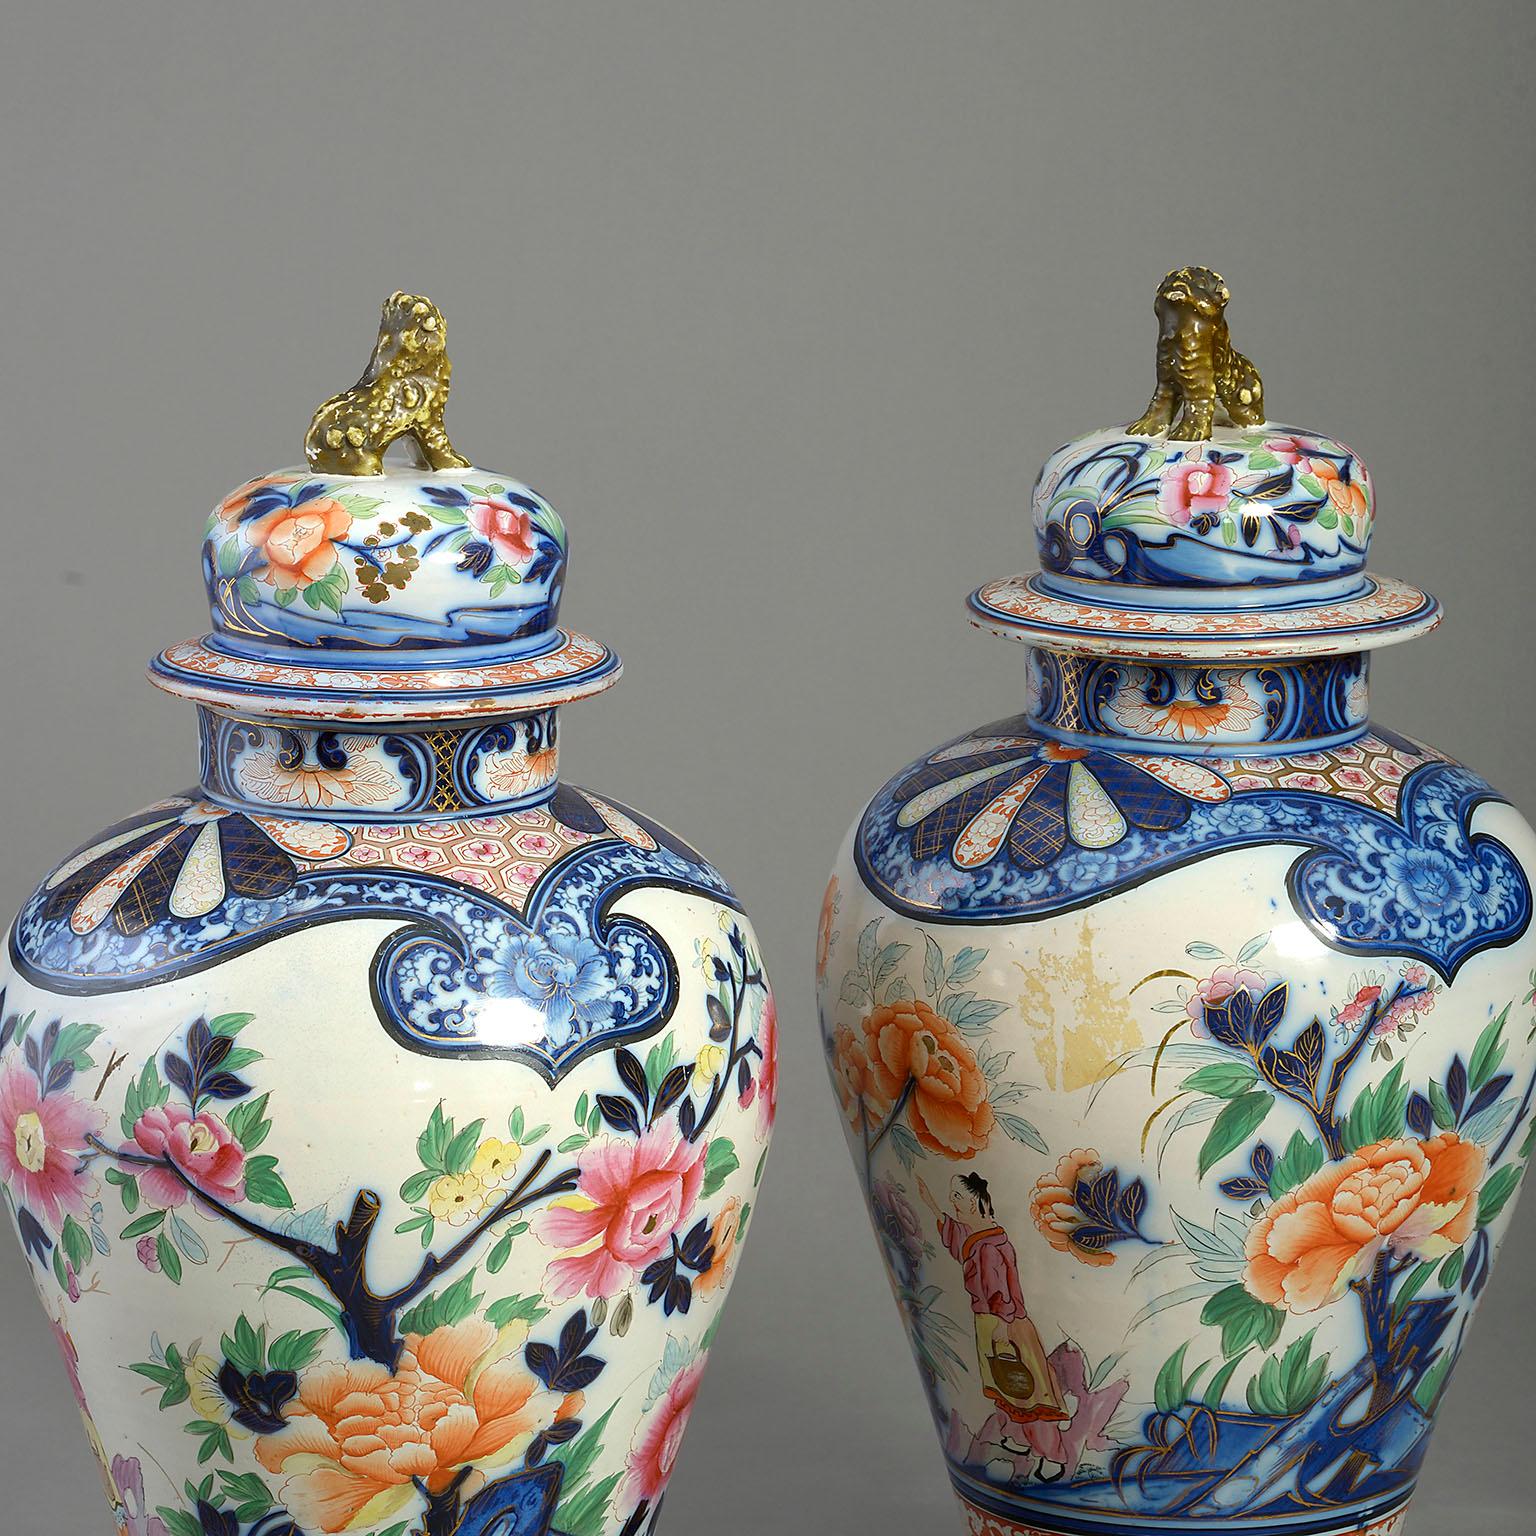 A rare pair of early nineteenth century faience pottery vases and covers, decorated in the Imari taste, with gilded lion finials, the bodies profusely decorated with figures, exotic birds, flowers and foliage. Set upon ebonised wooden